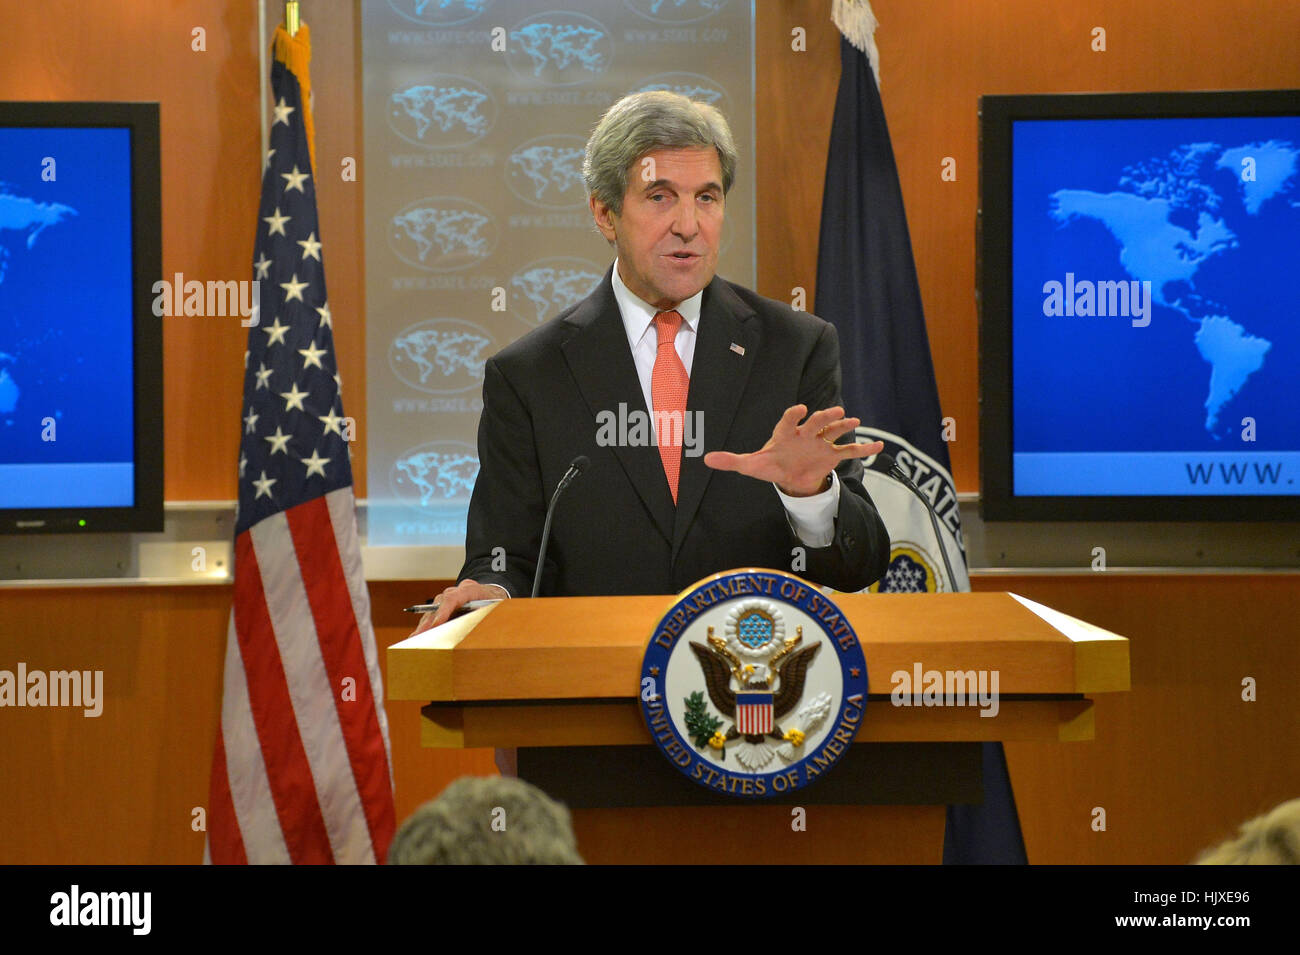 U.S. Secretary of State John Kerry holds a press conference at the U.S. Department of State in Washington, D.C., on January 5, 2017. Stock Photo